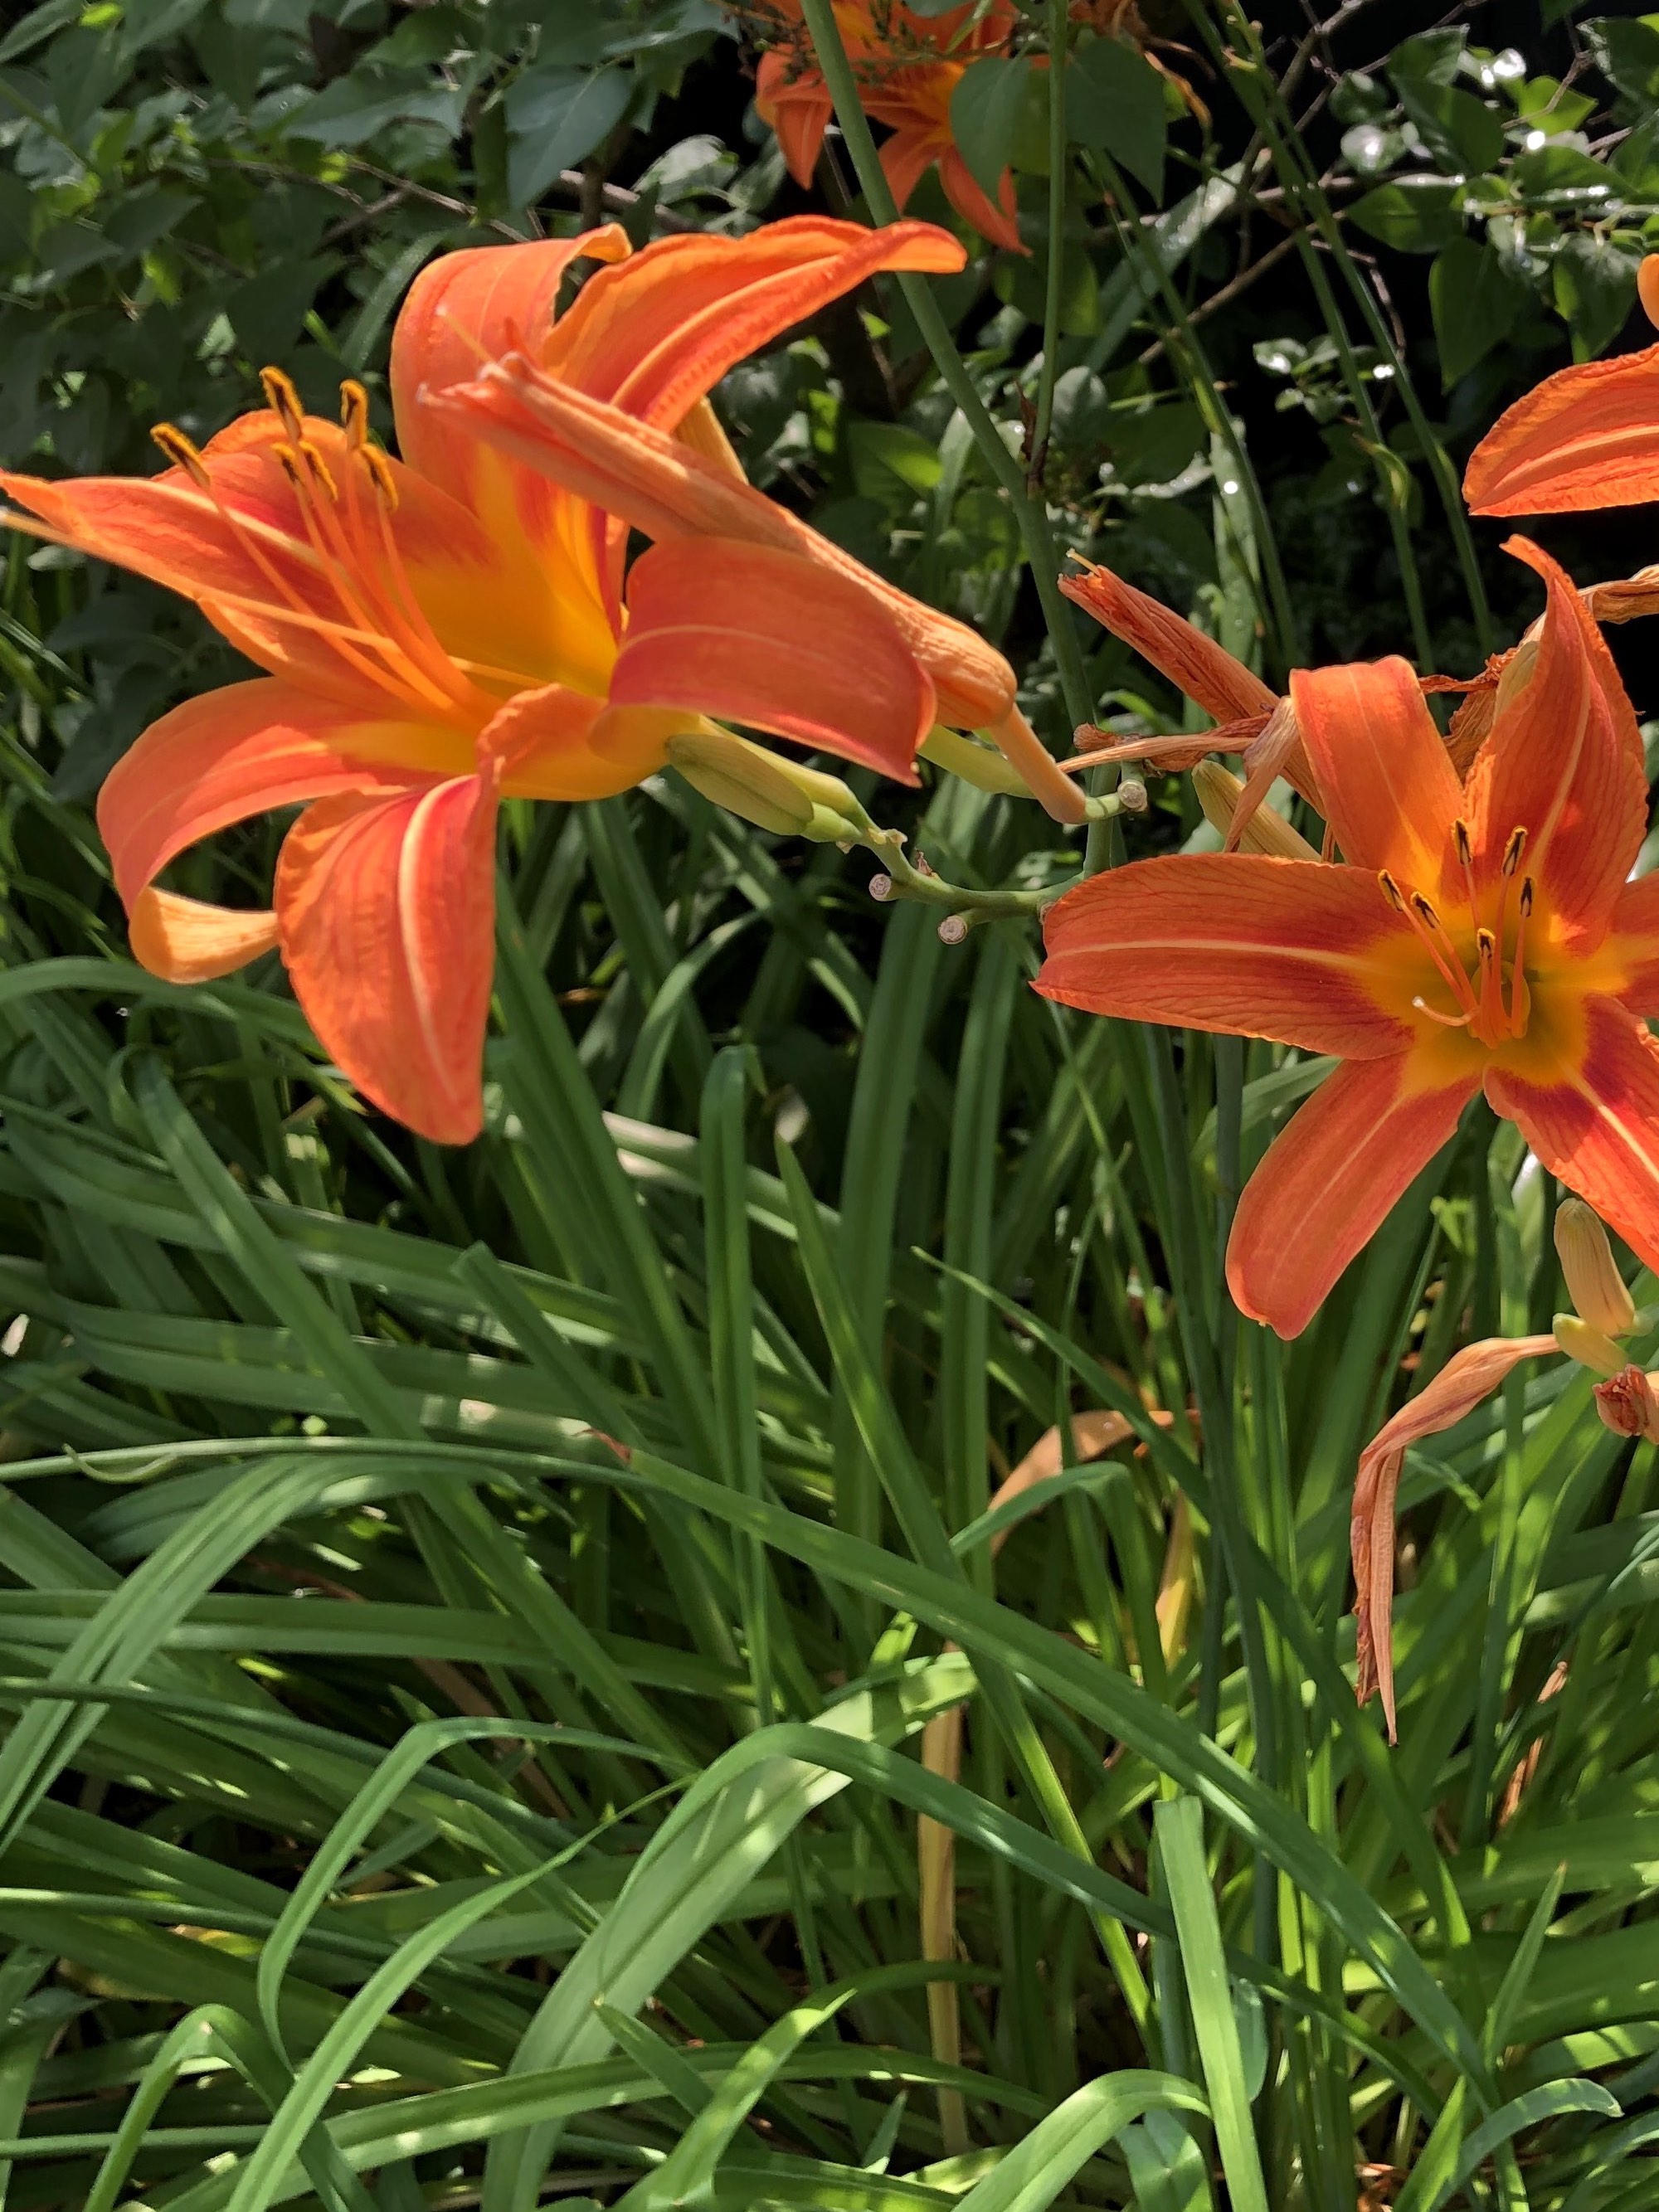 Orange Day Lily in Nakoma yard in Madison, Wisconsin on July 8, 2020.